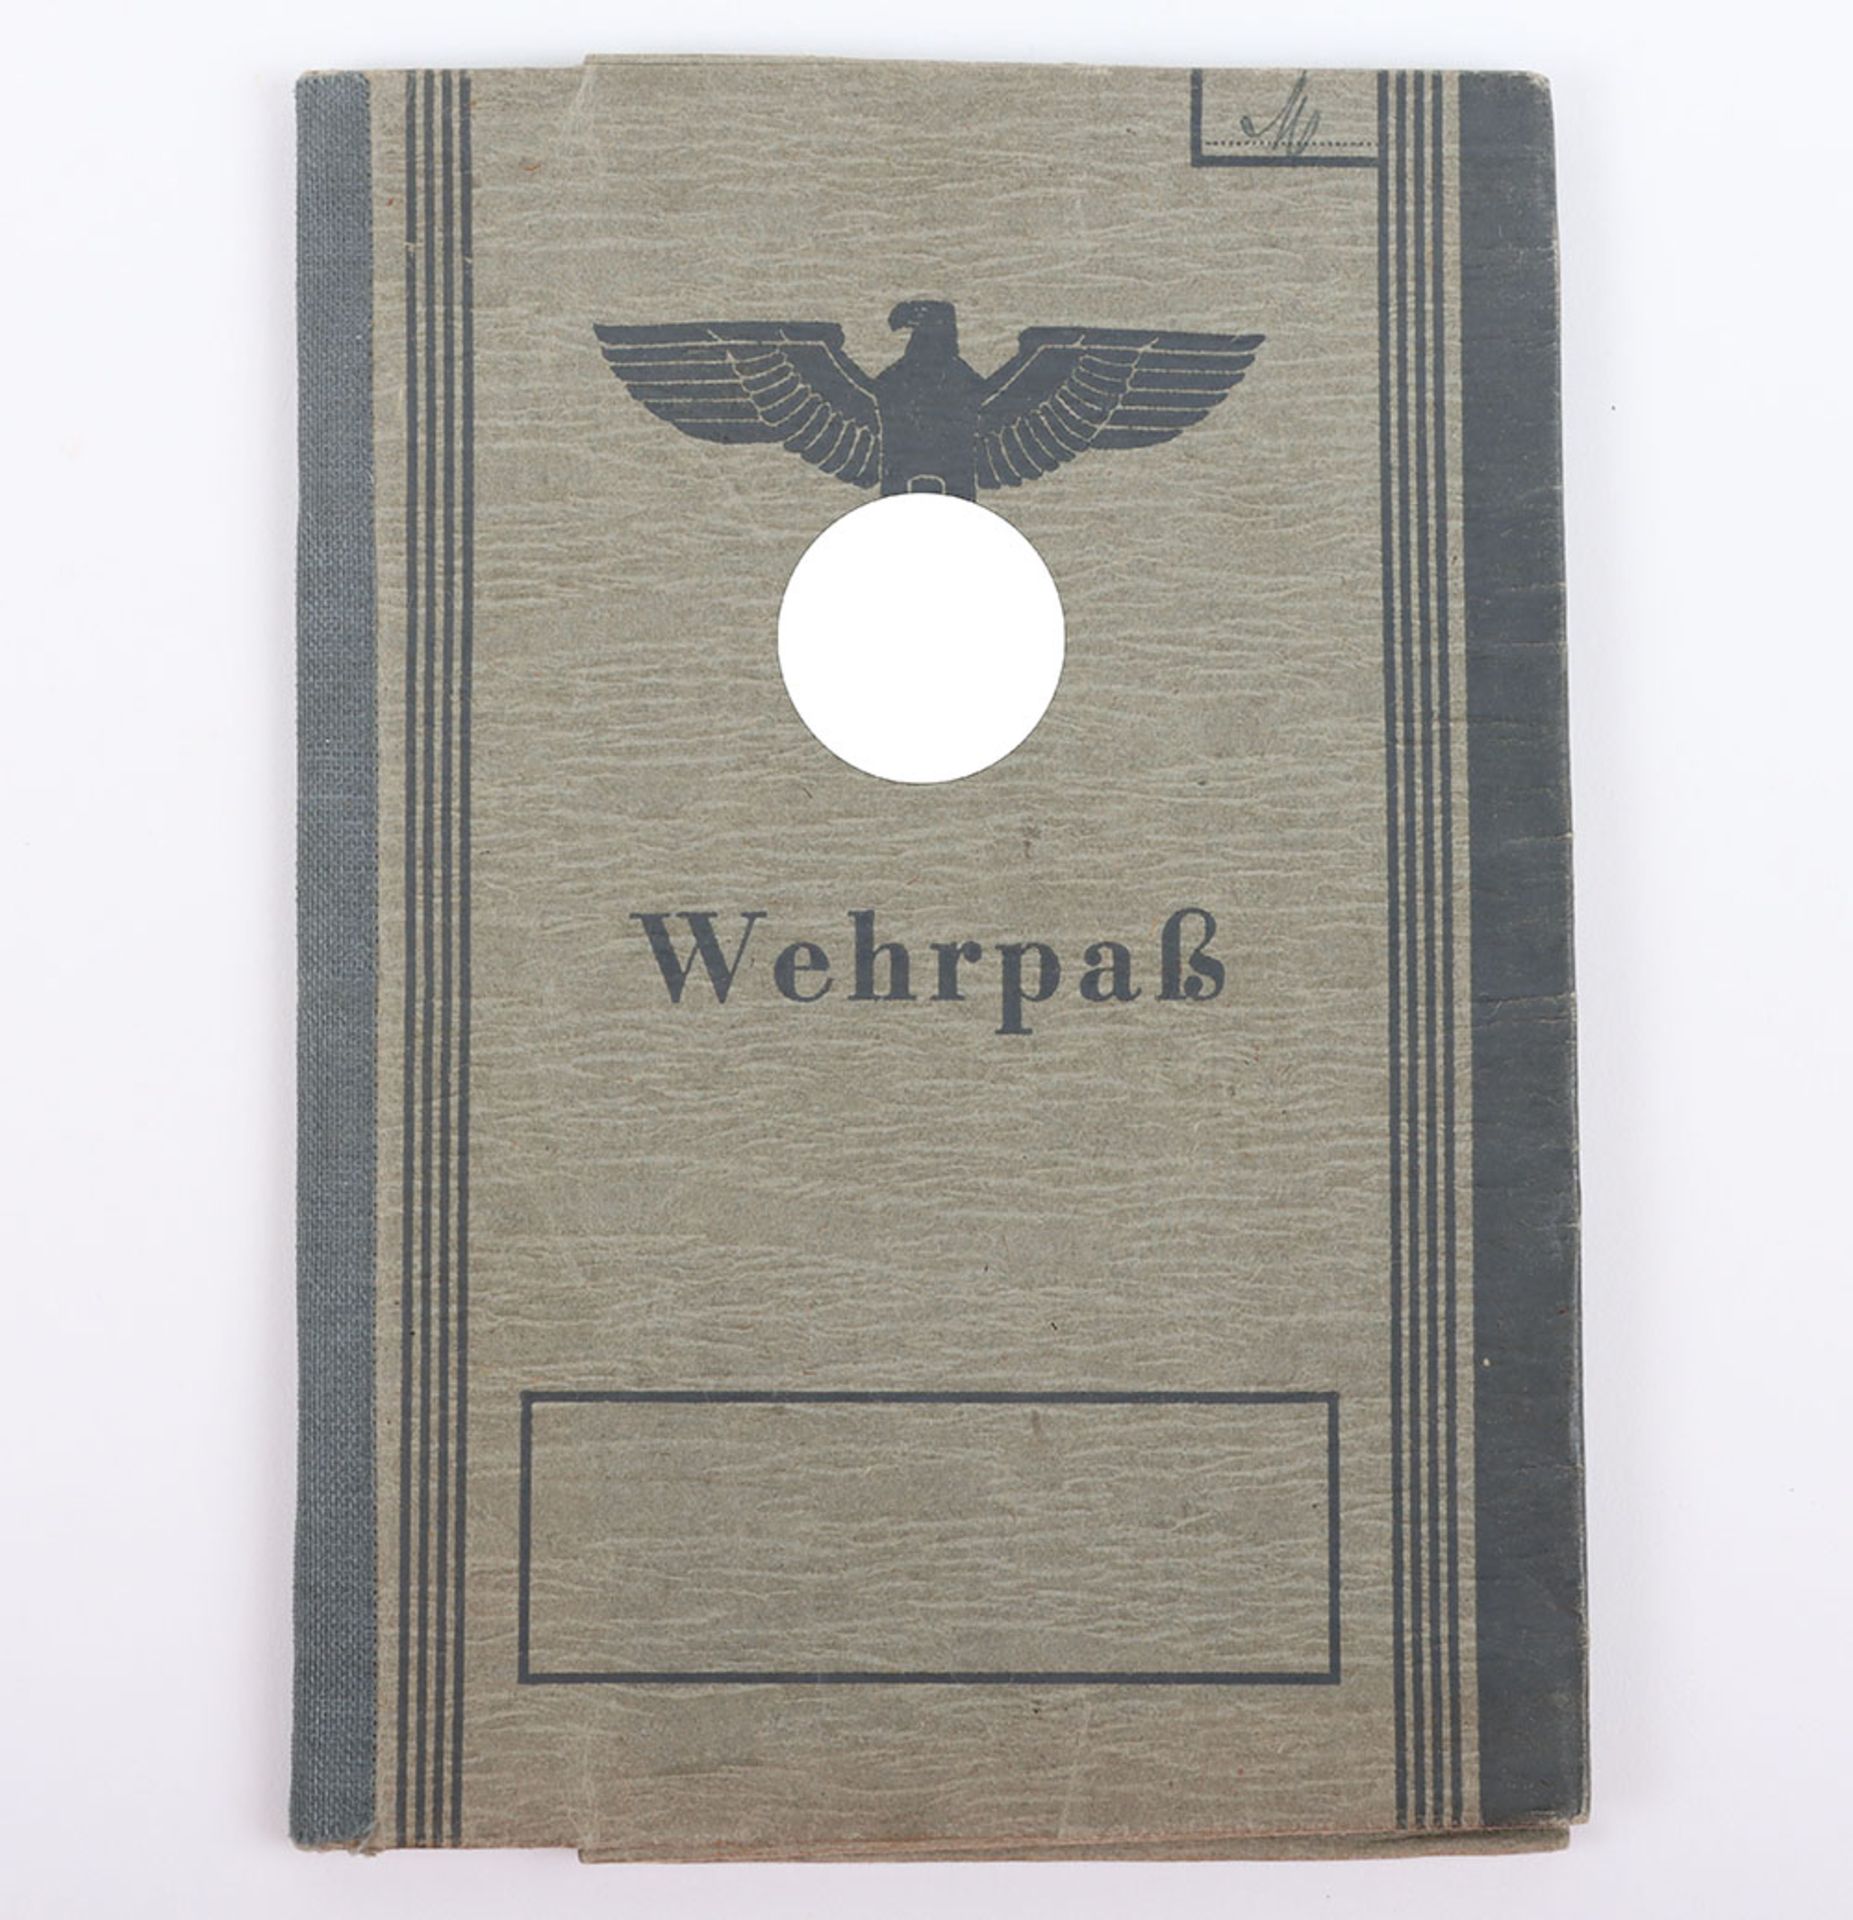 WW2 German Armed Forces Wehrpass Issued in April 1945